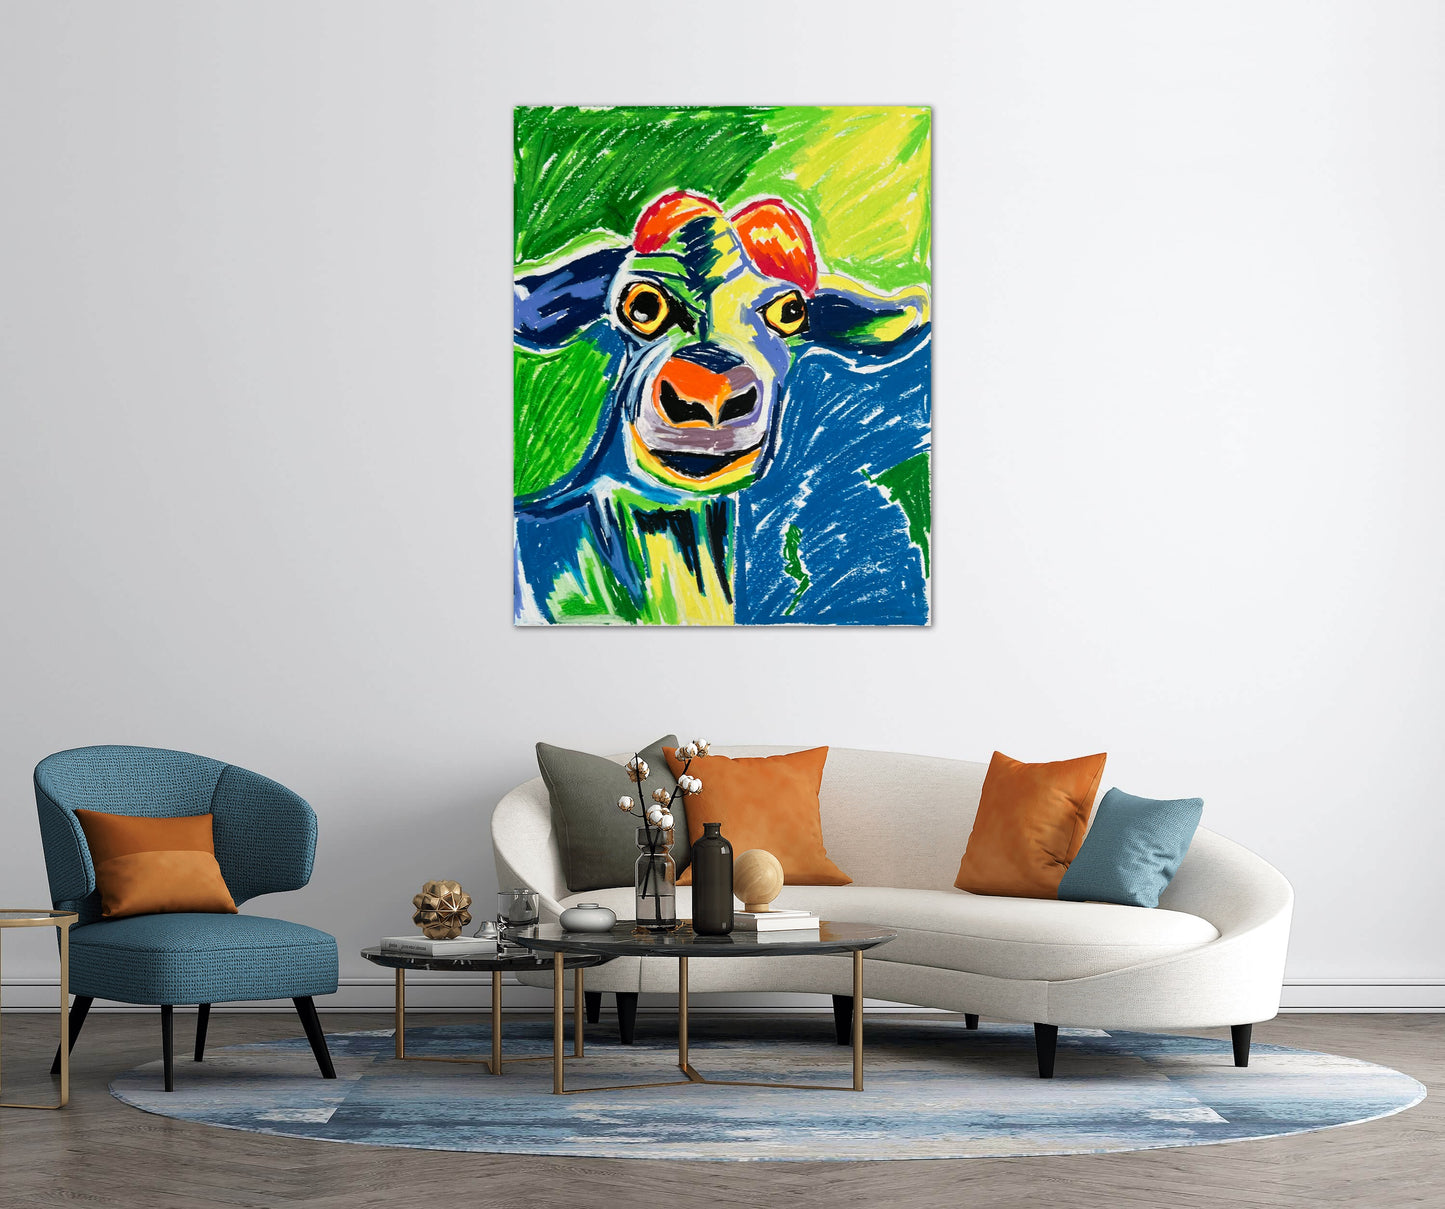 Silly Goat - fine prints and canvas prints in more size